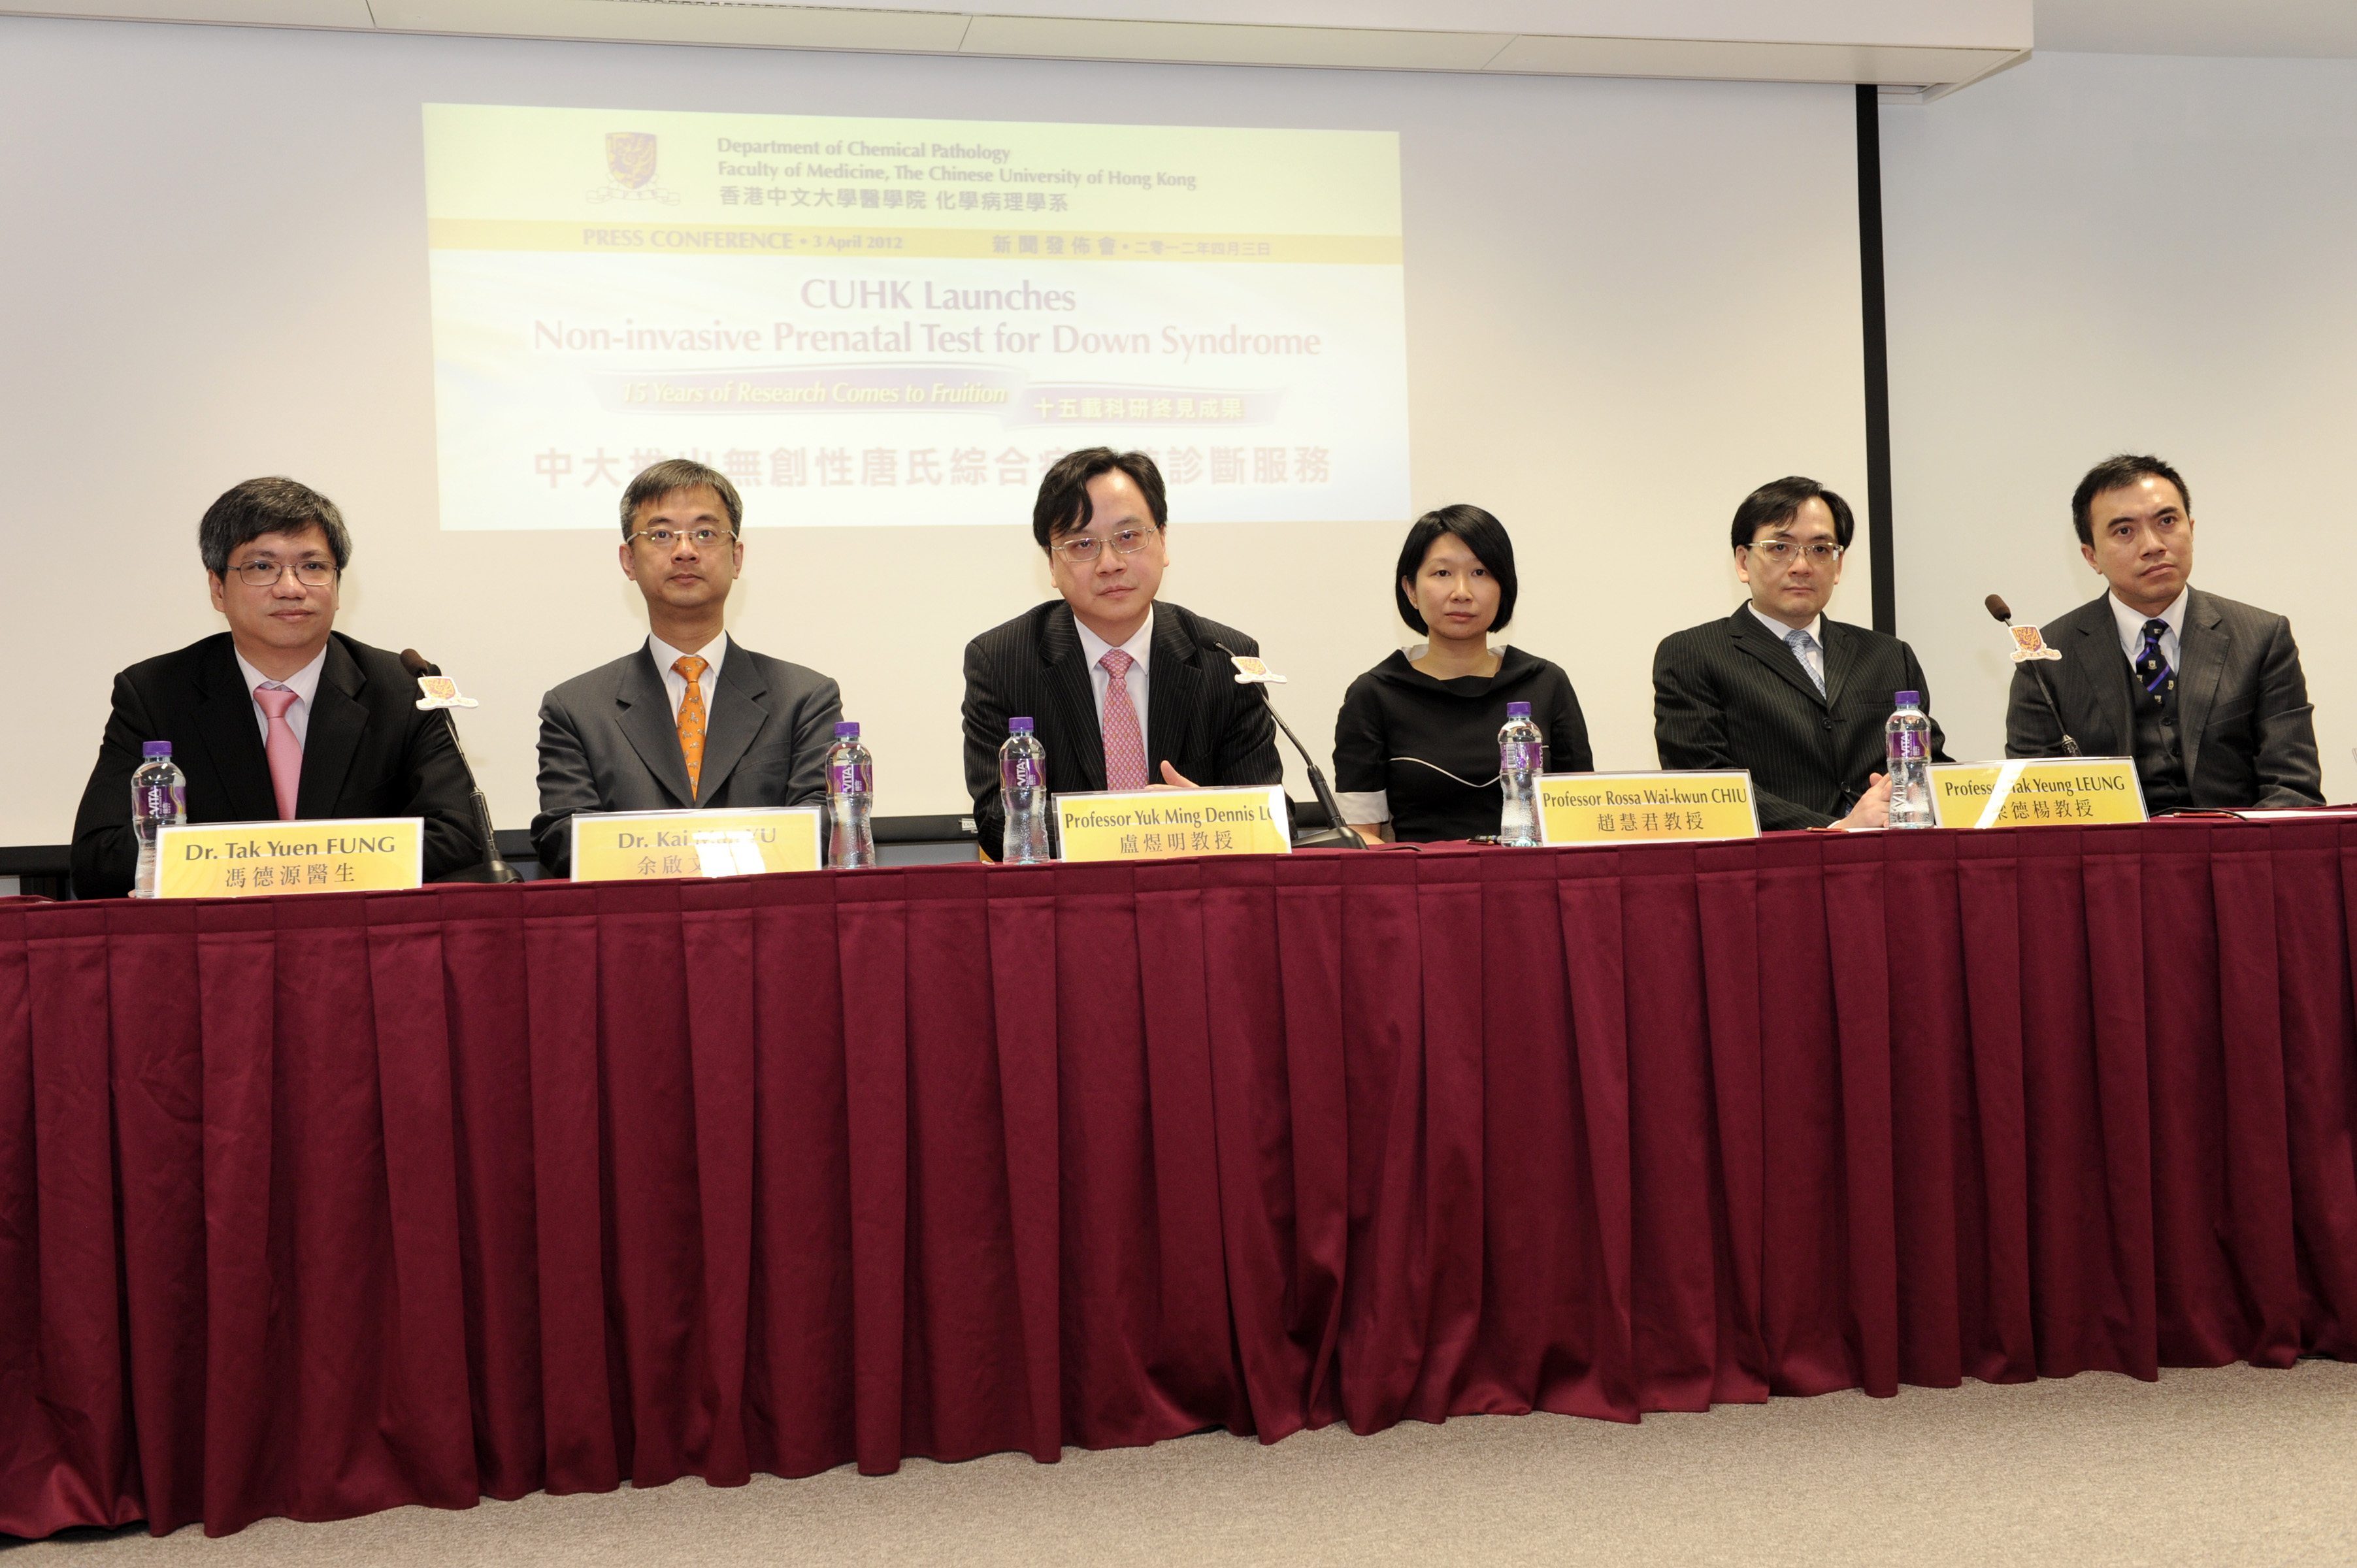 (From left) Dr. Fung Tak-yuen, Chief of Service, Obstetrics and Gynaecology, Hong Kong Baptist Hospital; Dr. Yu Kai-man, Head of Obstetrics and Gynaecology Department, Union Hospital; Prof. Lo Yuk-ming Dennis, Li Ka Shing Professor of Medicine and Chairman of Department of Chemical Pathology, CUHK; Prof. Chiu Wai-kwan Rossa, Professor, Department of Chemical Pathology, CUHK; Prof. Leung Tak-yeung, Professor, Department of Obstetrics and Gynaecology, CUHK and Dr. Leung Tse-ngong Danny, Director, Maternal and Fetal Medicine, Hong Kong Sanatorium and Hospital